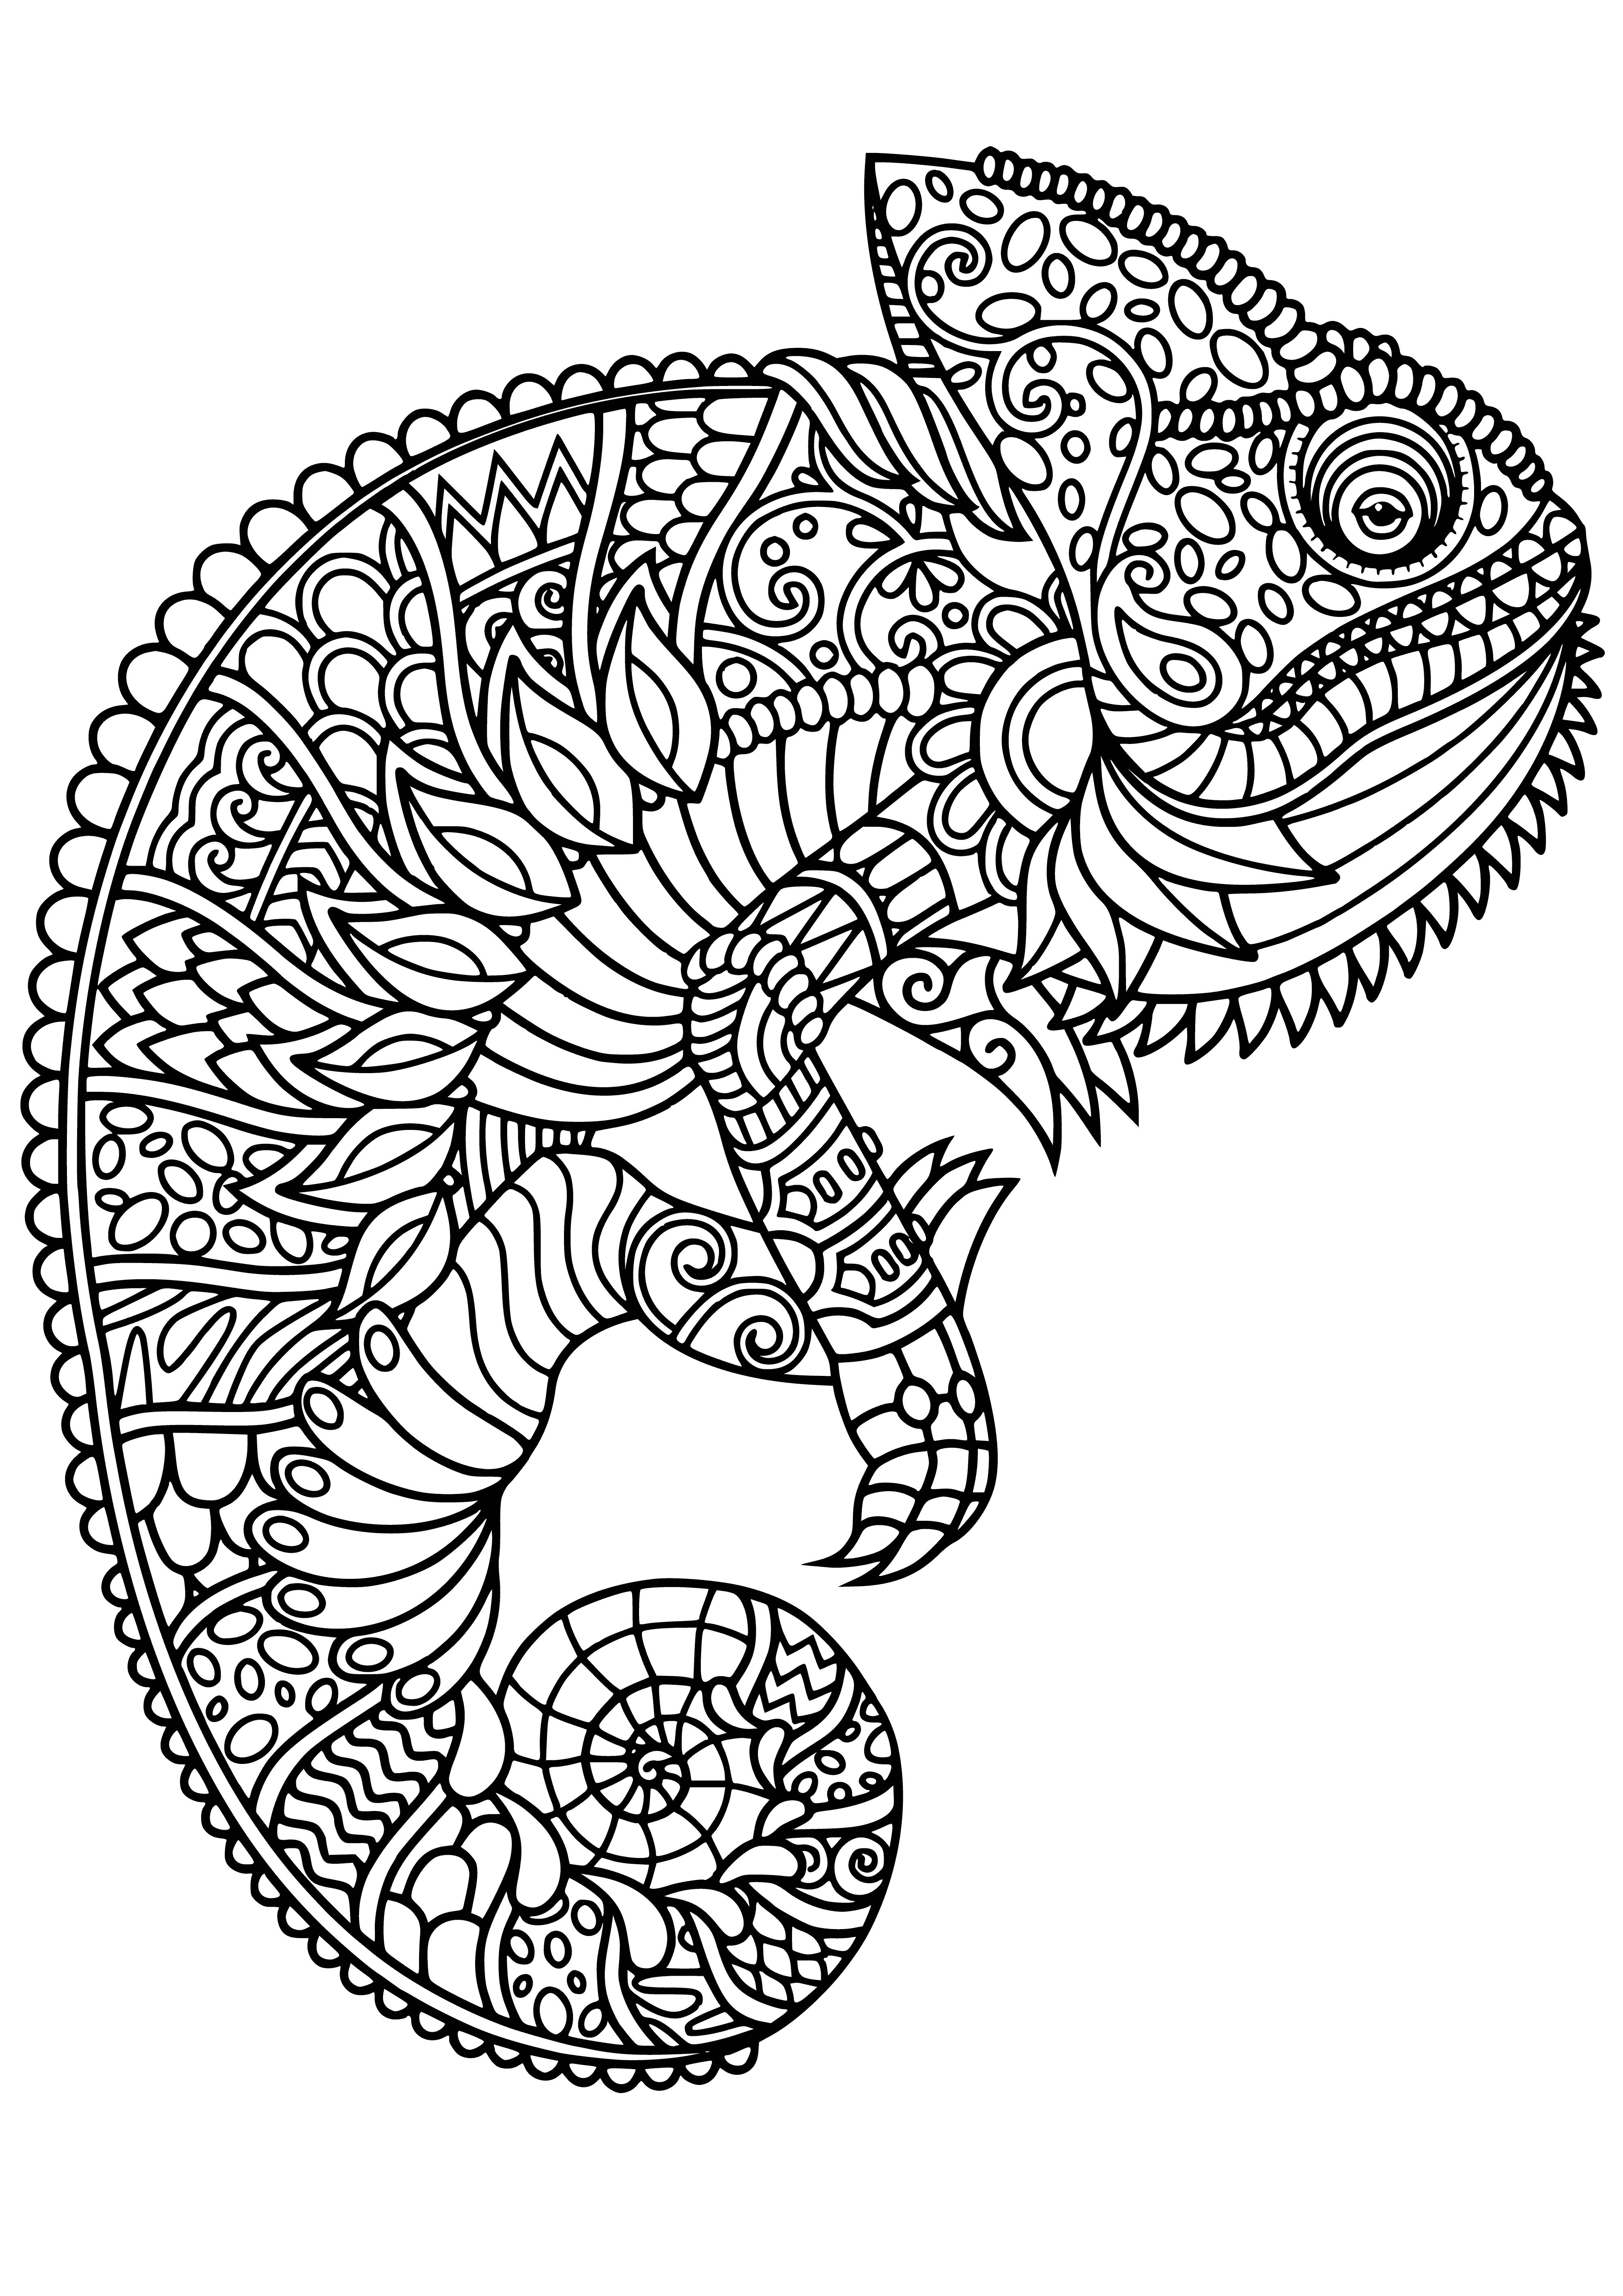 Chameleon coloring page